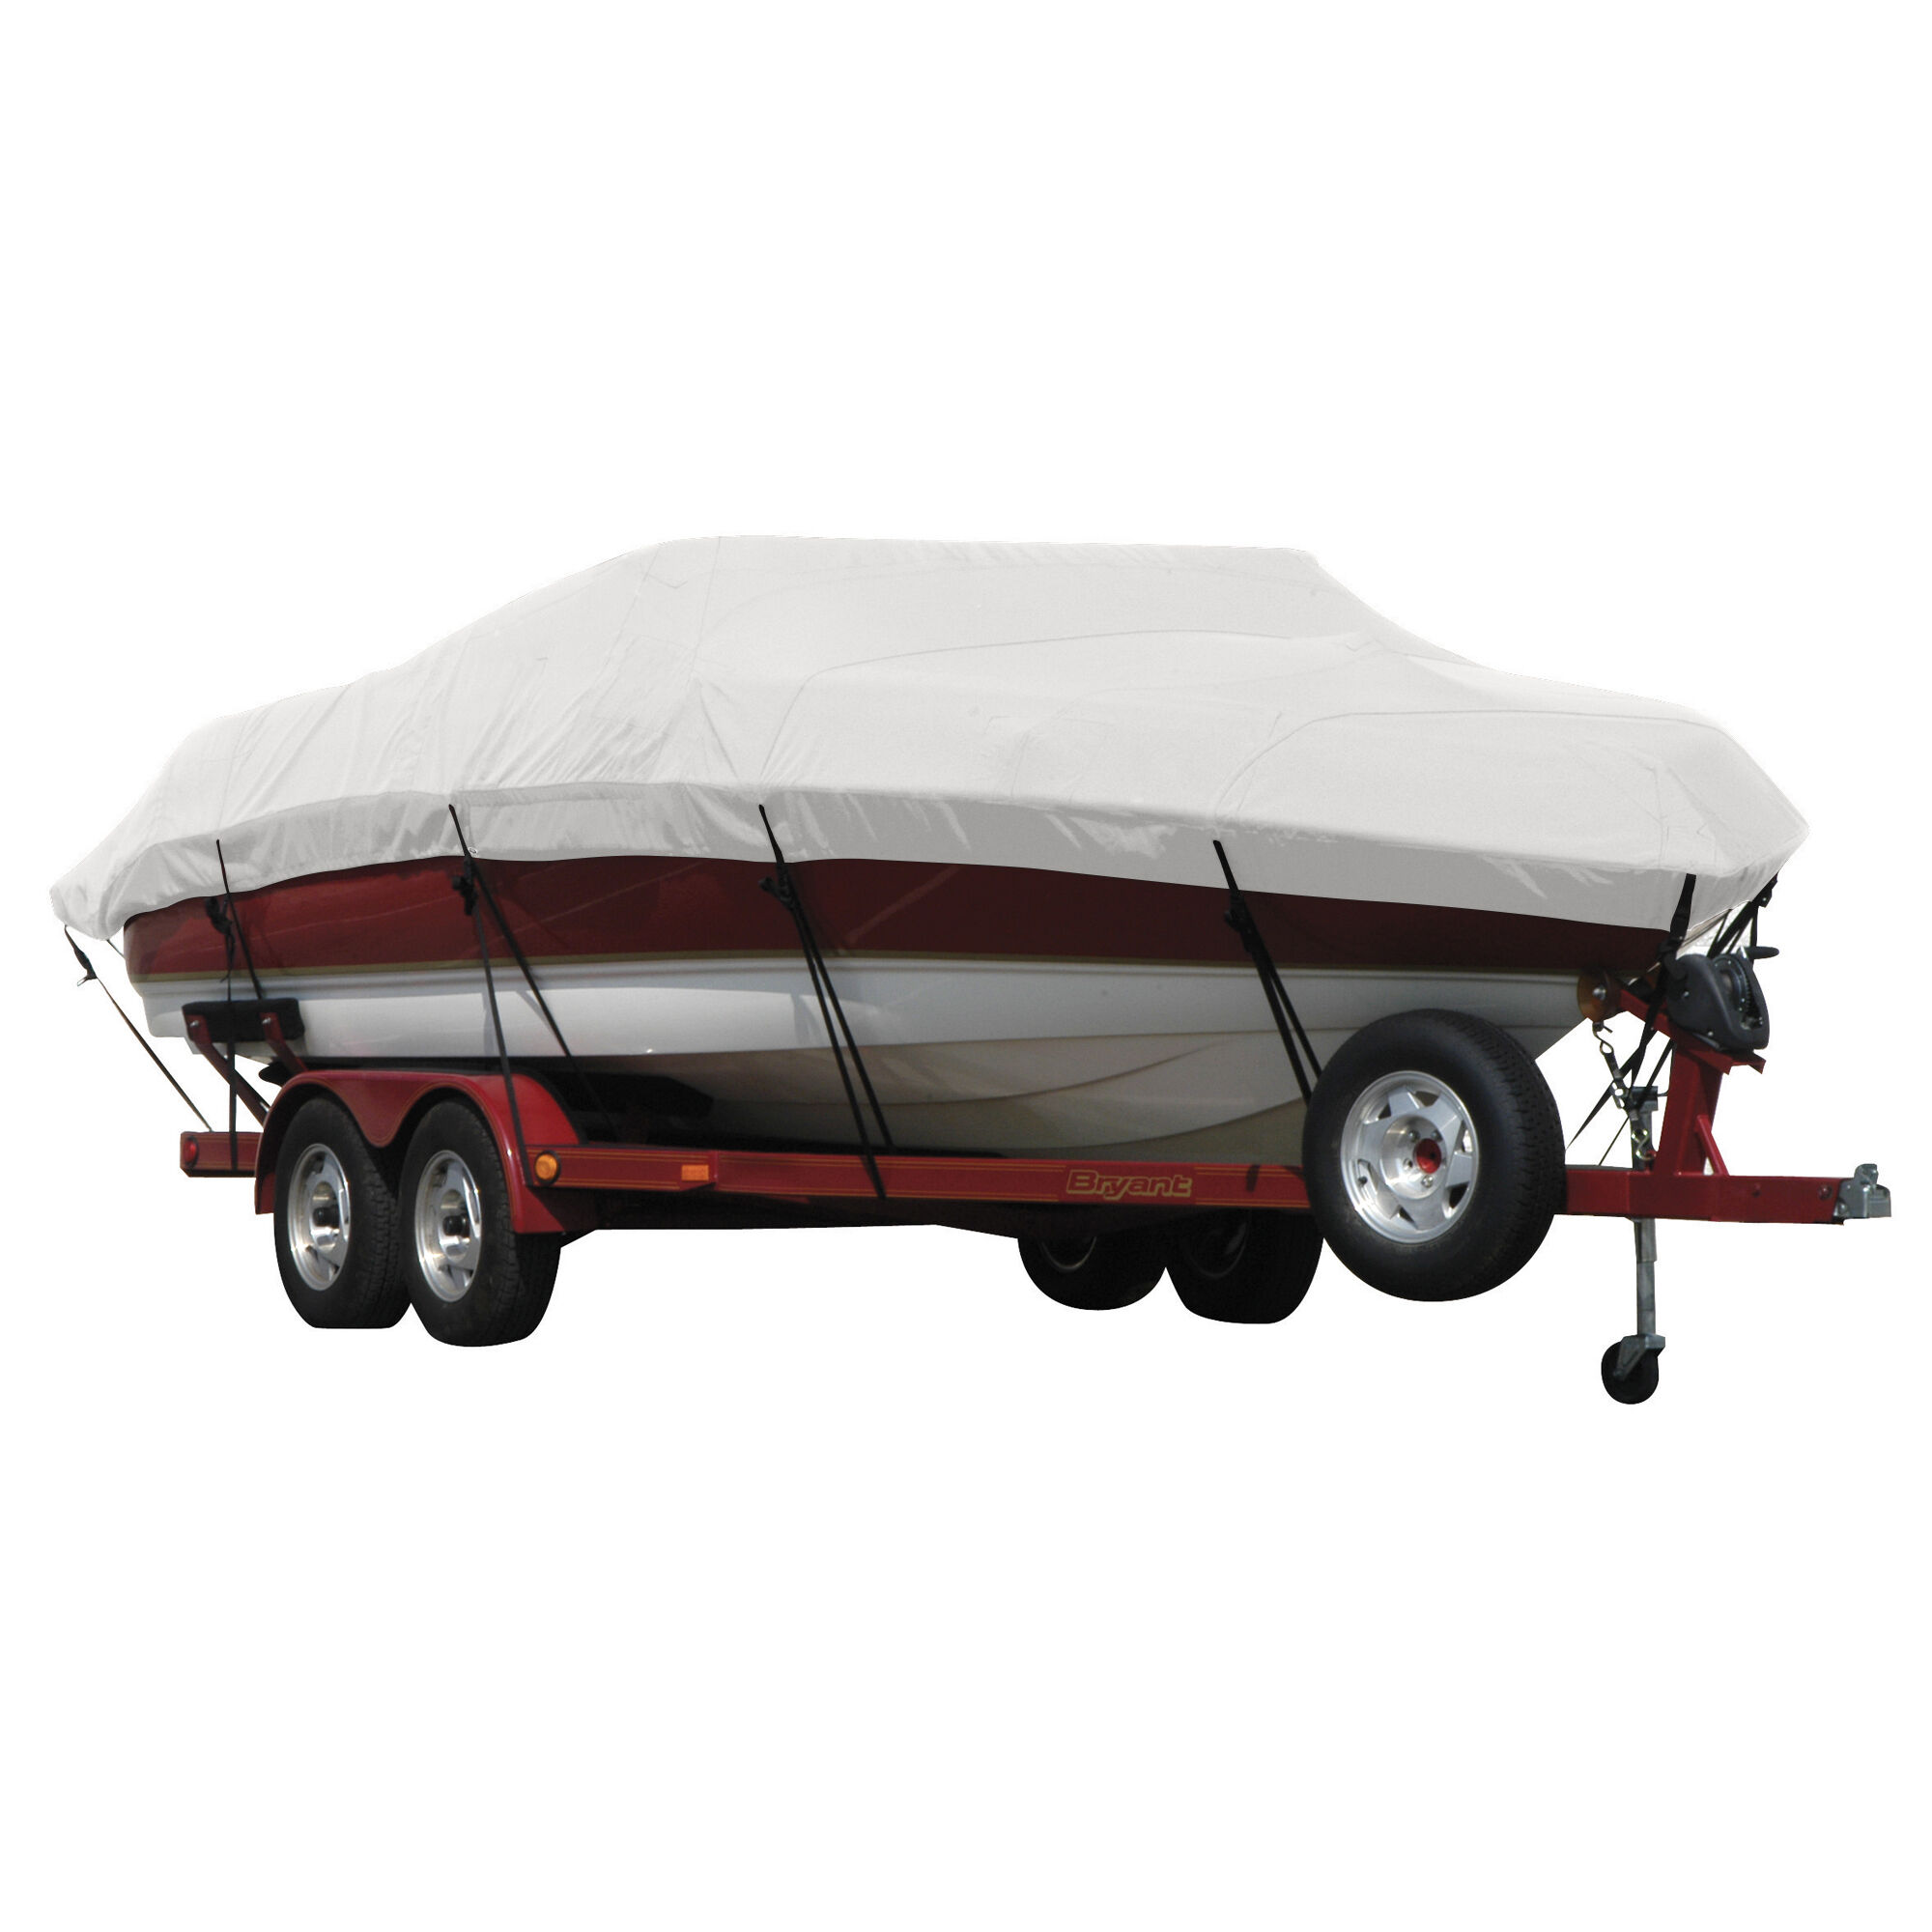 Covermate Exact Fit Sunbrella Boat Cover for Campion Chase 800 Chase 800 I/O. Natural in Natural Tan